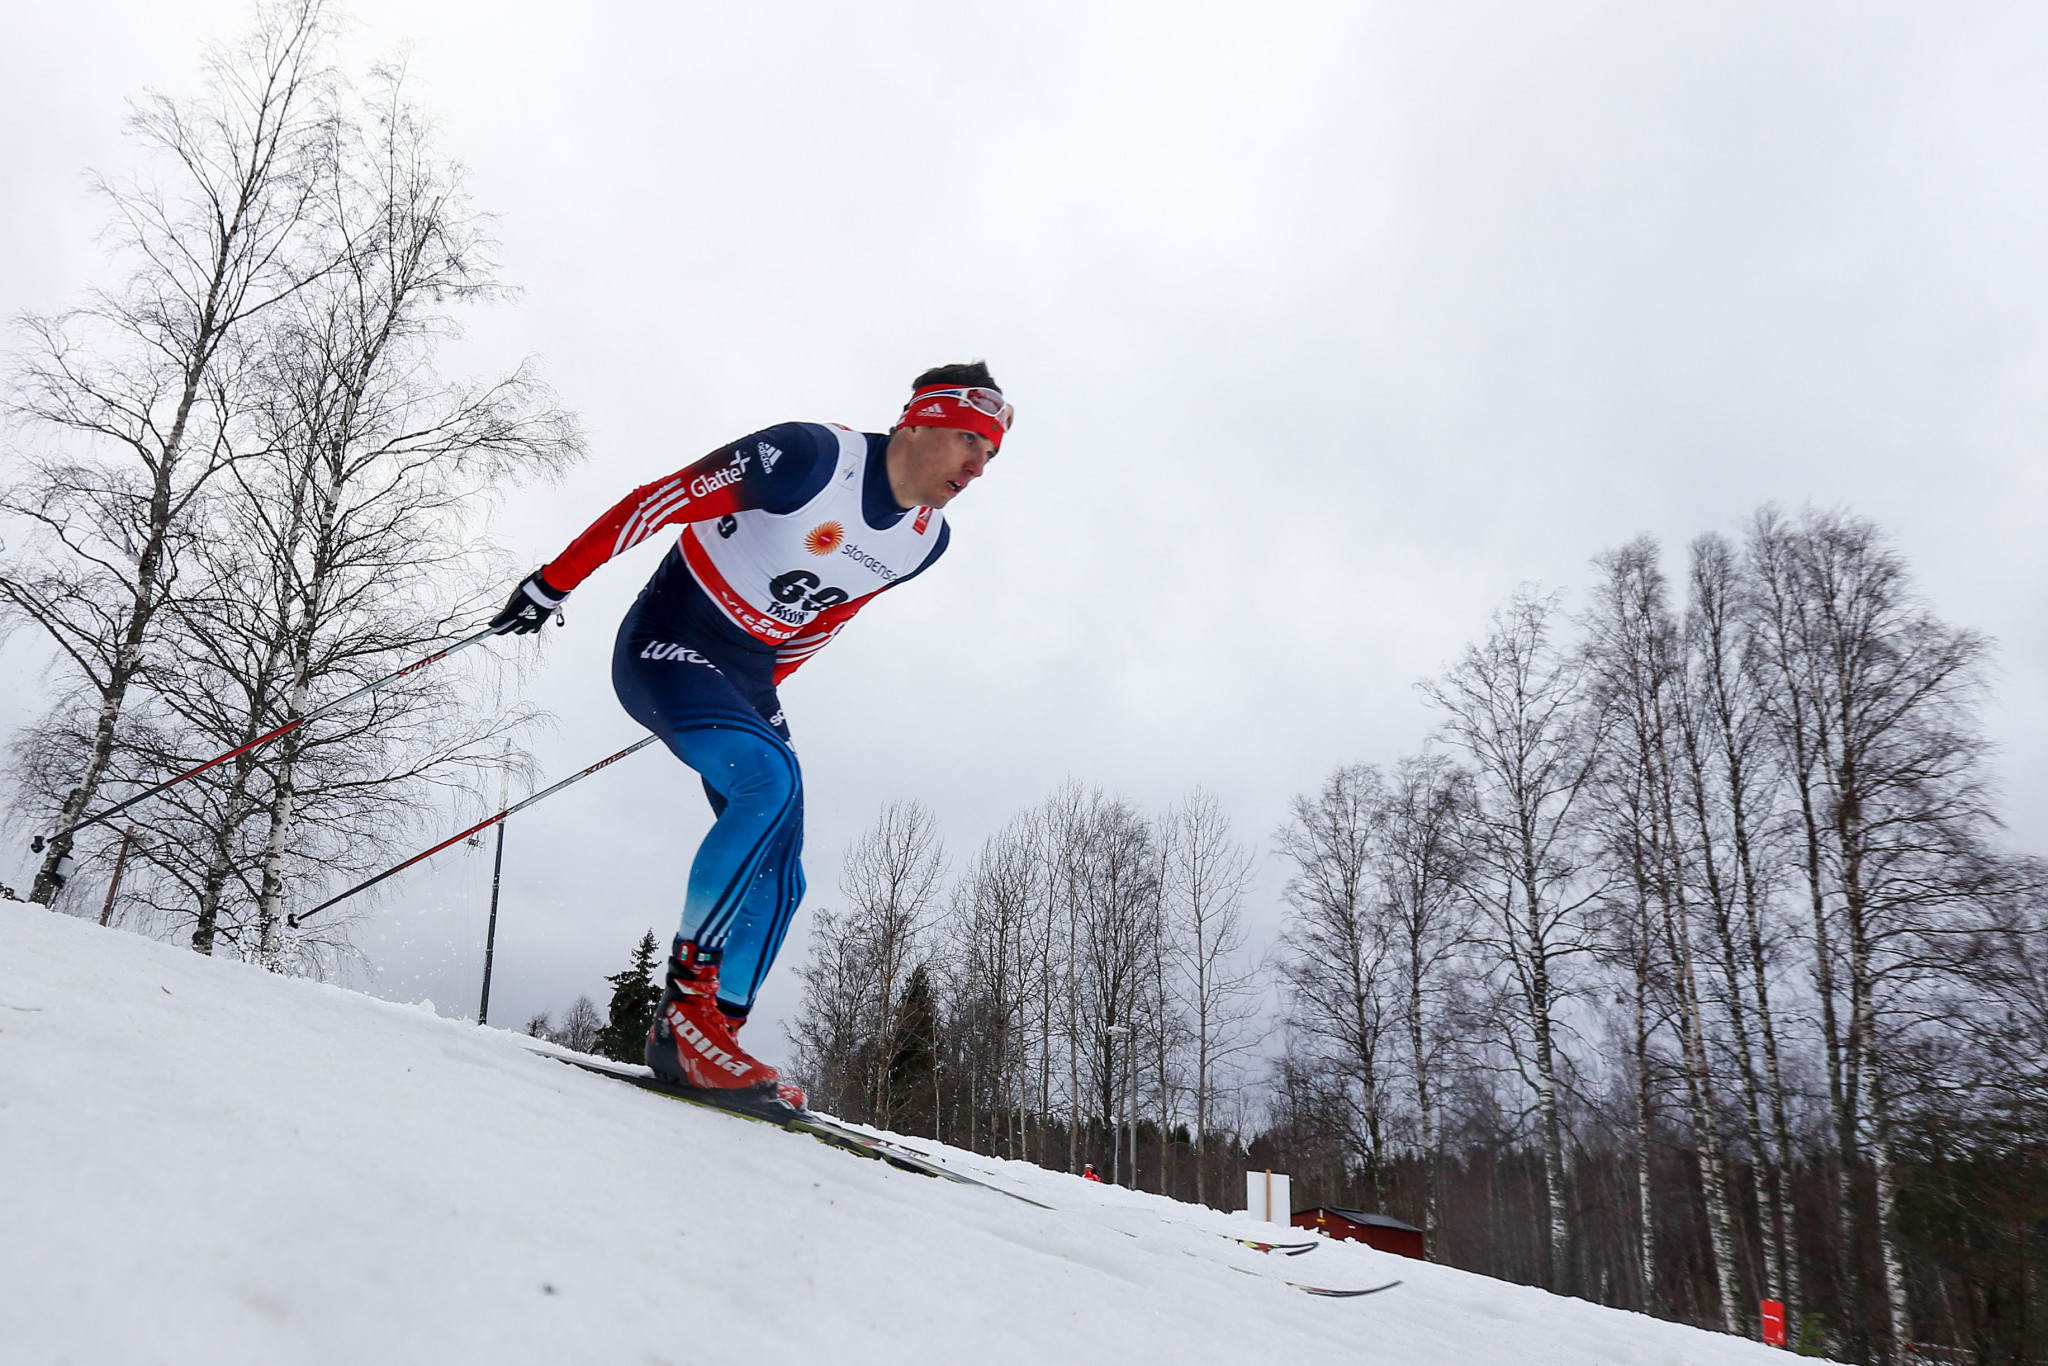 Bottles of samples provided by cross-country skier Evgeniy Belov revealed the presence of marks indicative of tampering, the reasoned decision from the Oswald Commission revealed ©Getty Images